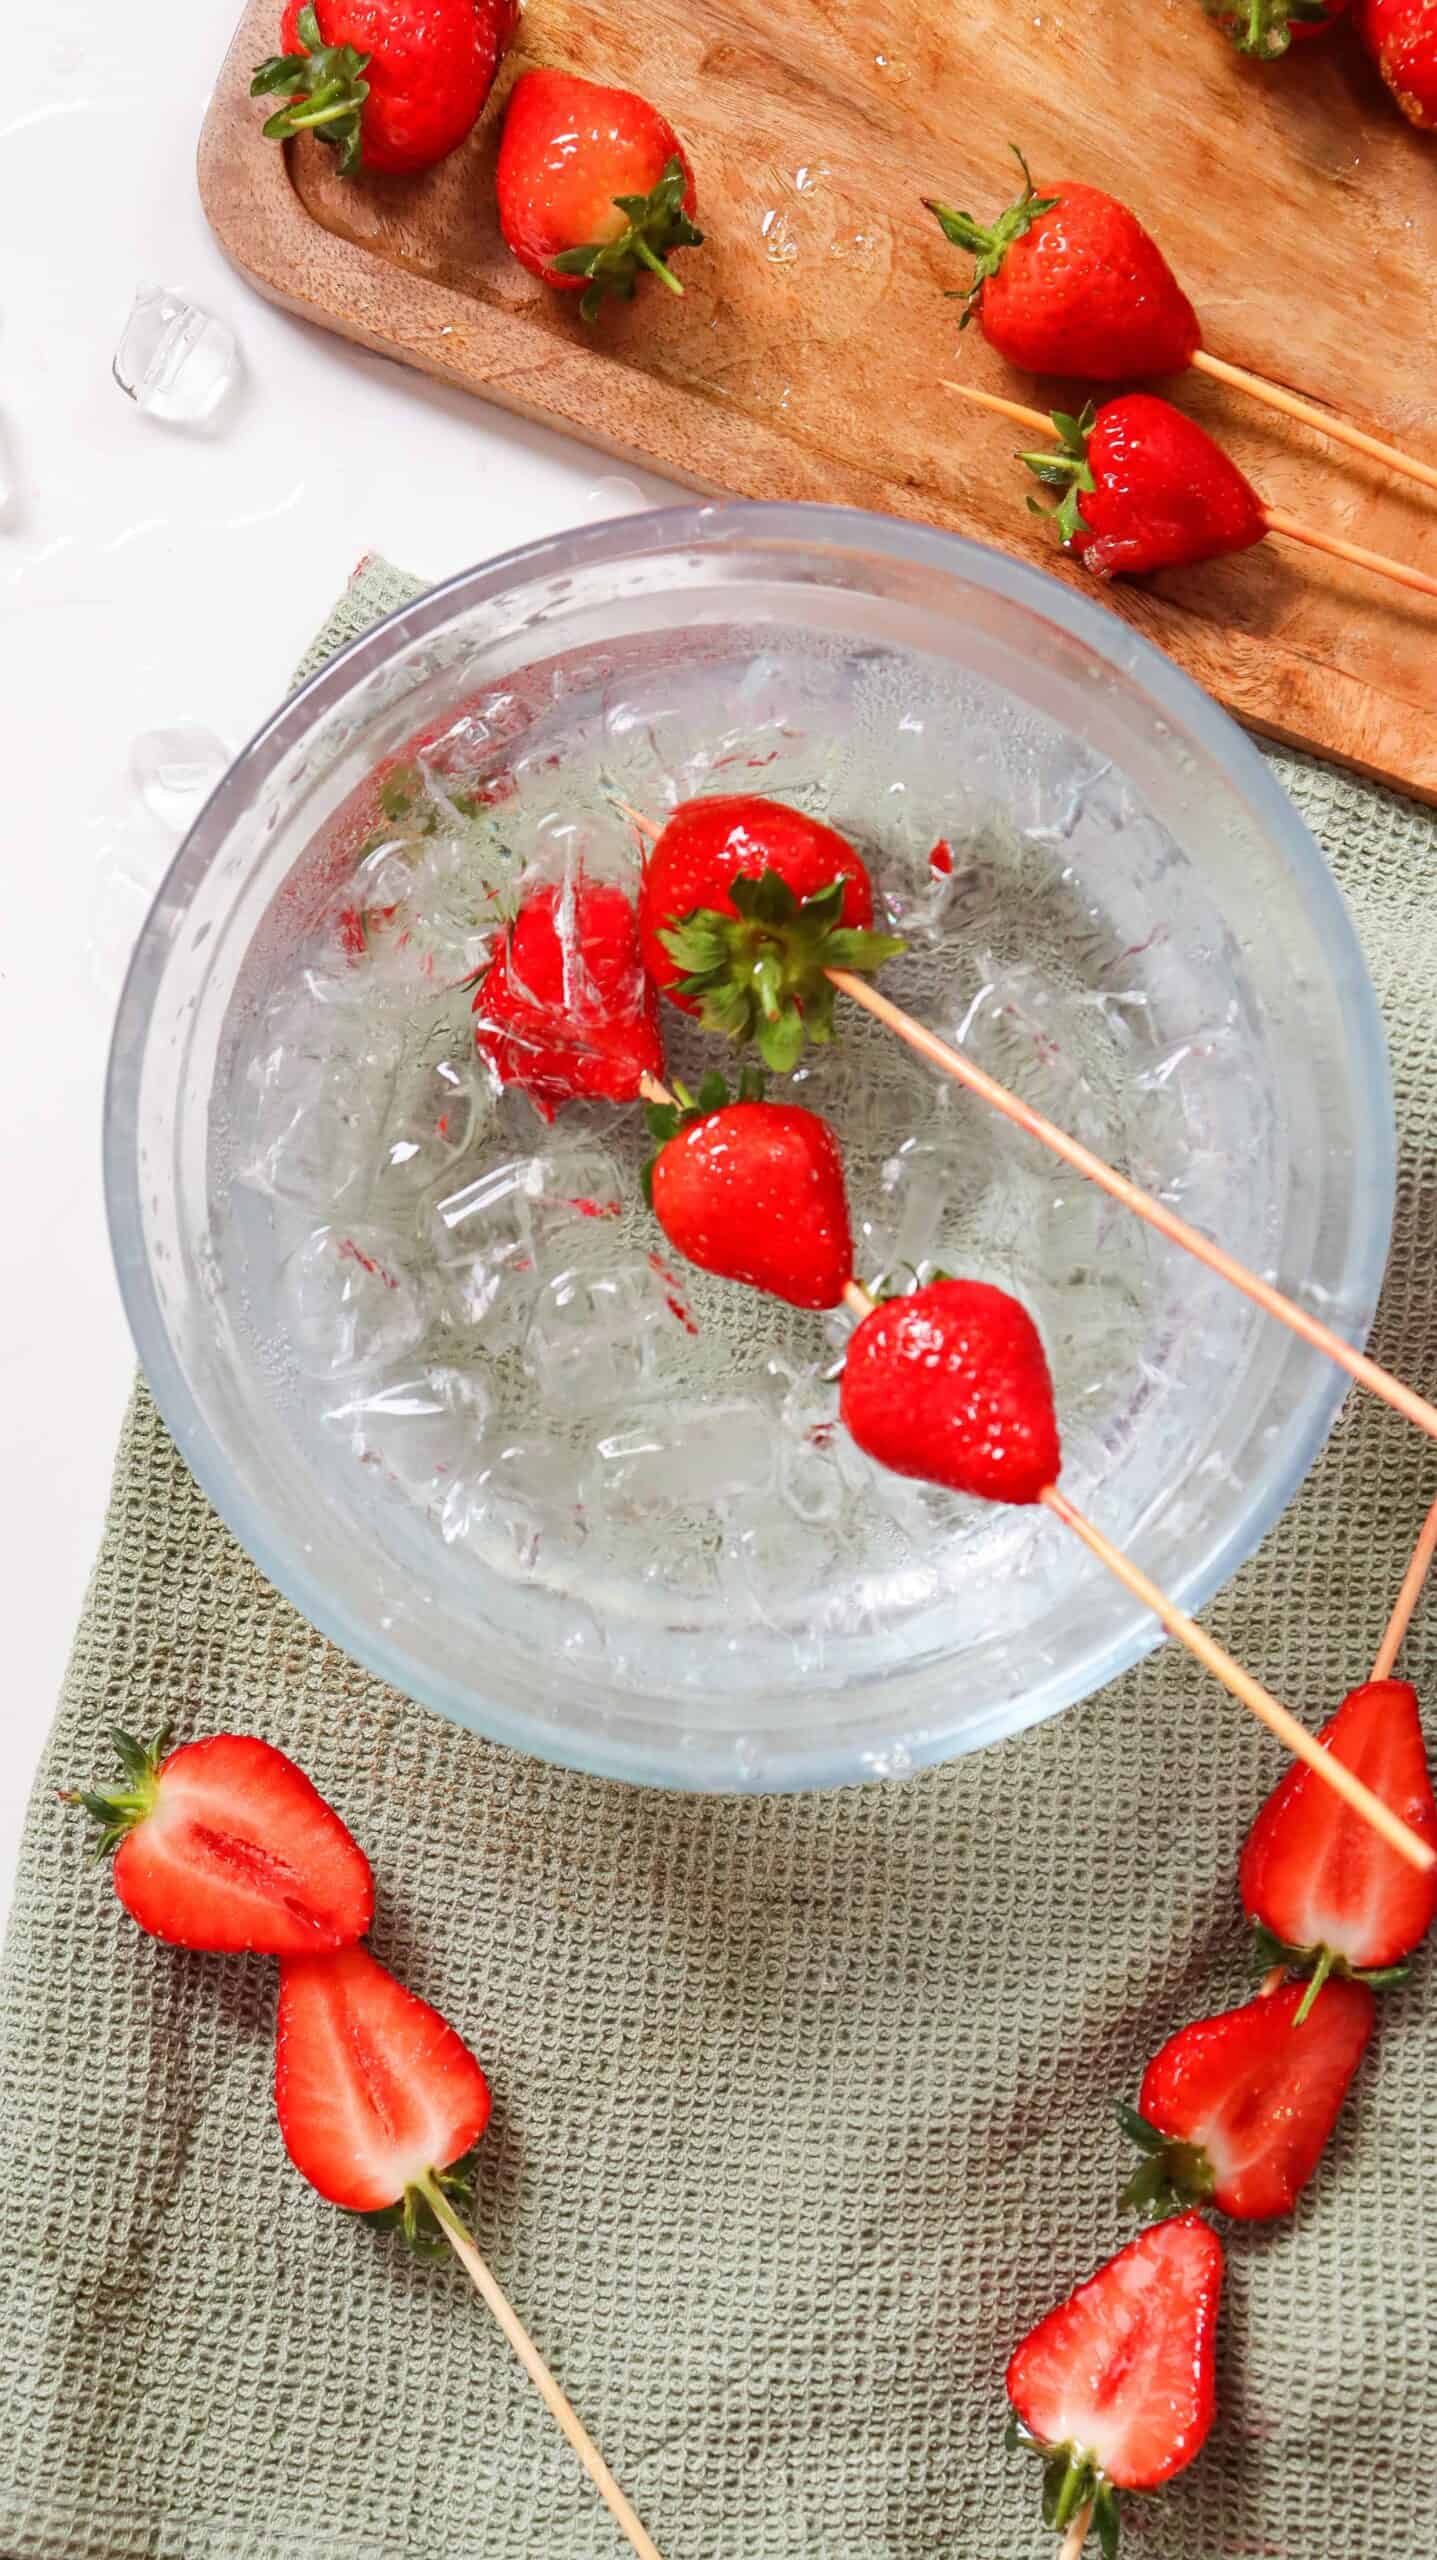 coated strawberries dipped in ice water bath